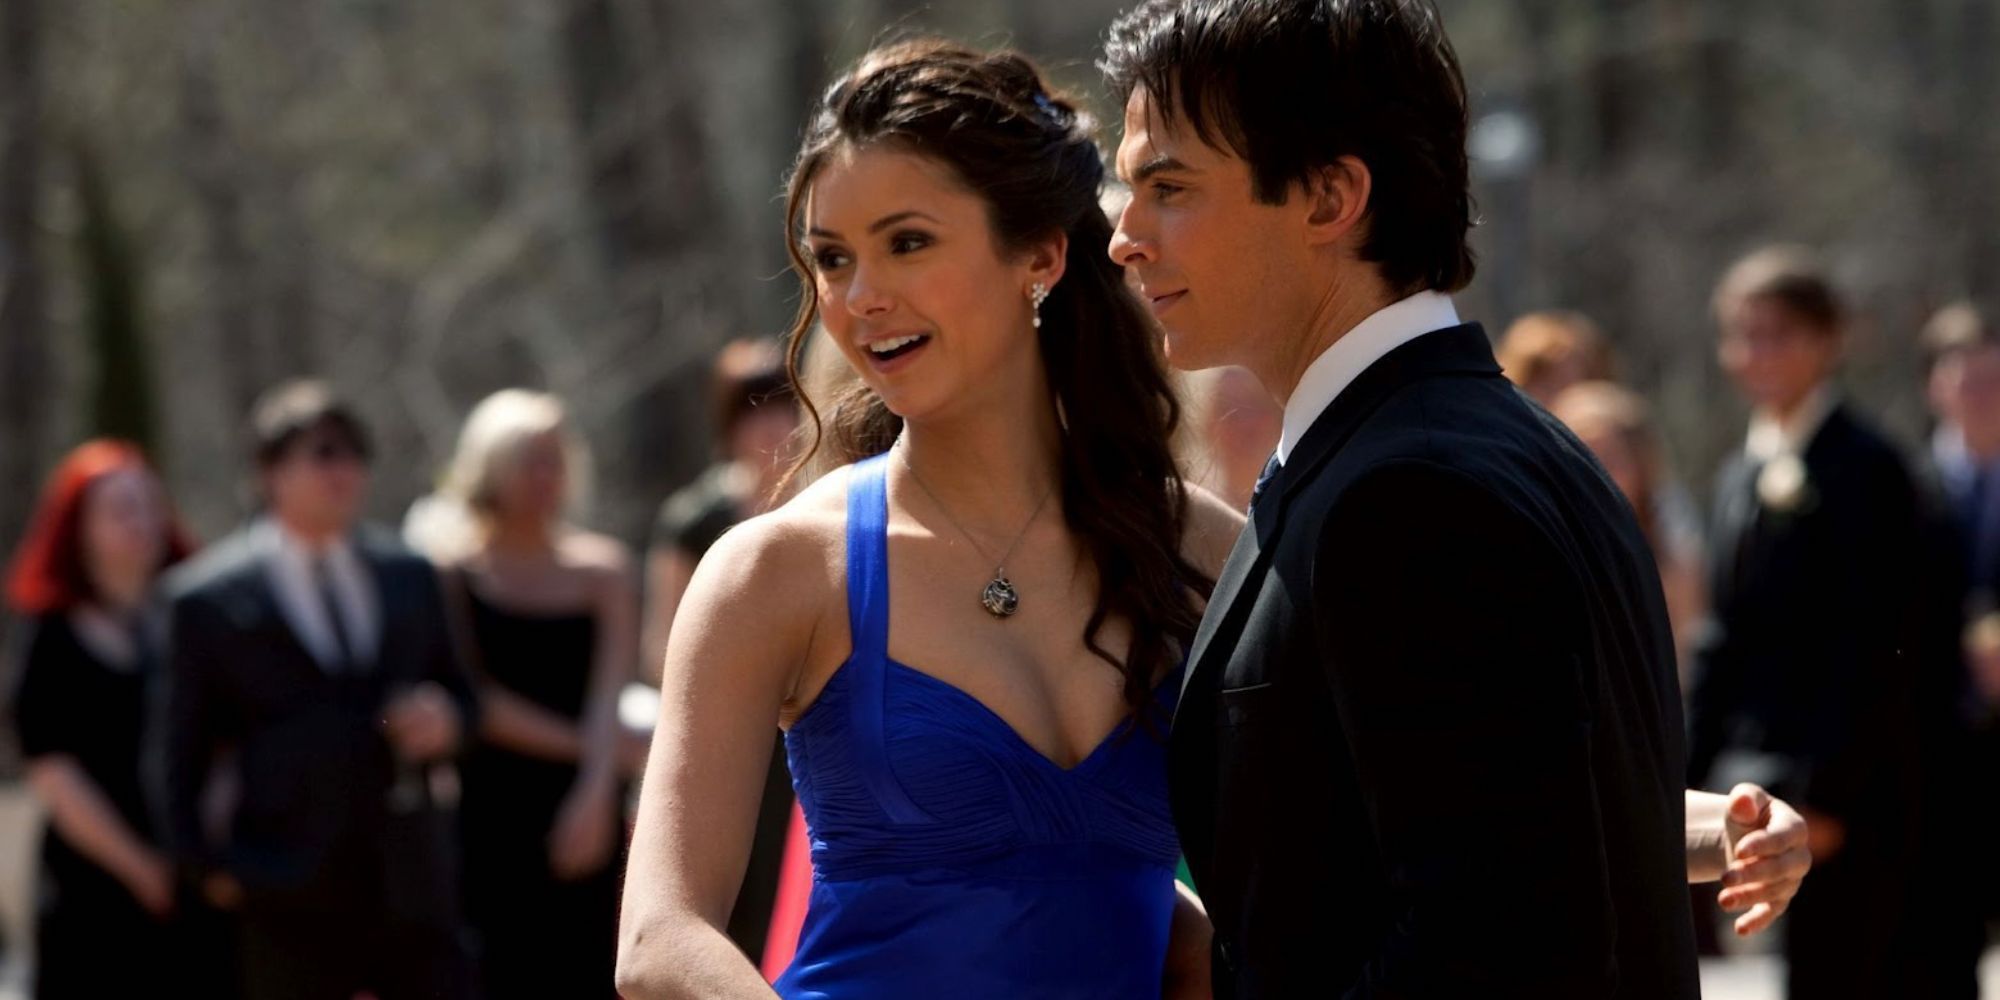 The Vampire Diaries' 10th Anniversary - The Start Of A Franchise